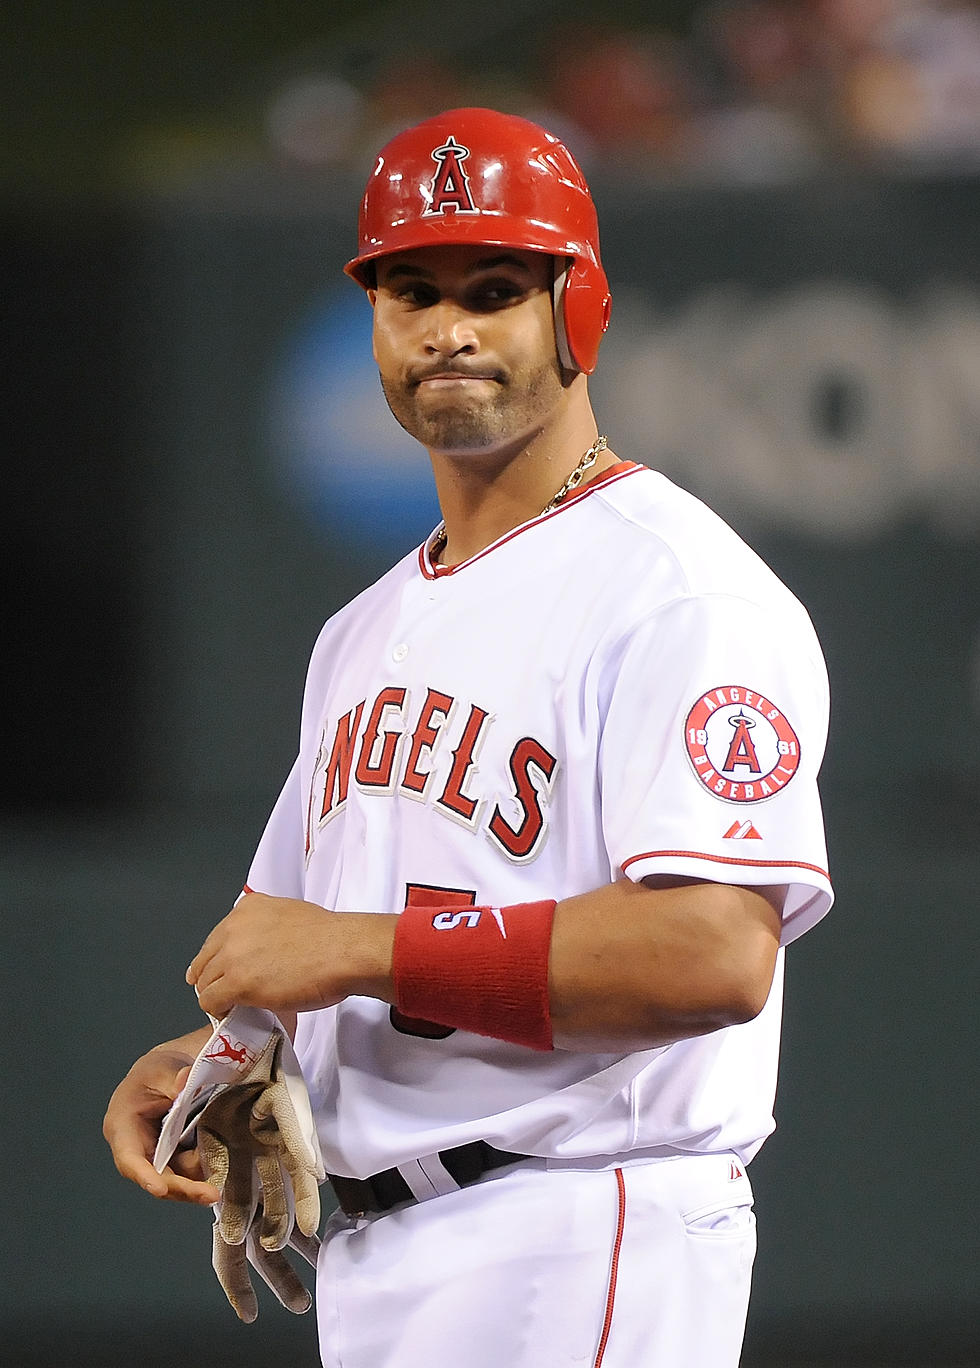 Are you happy that Pujols is having a terrible year? [POLL]